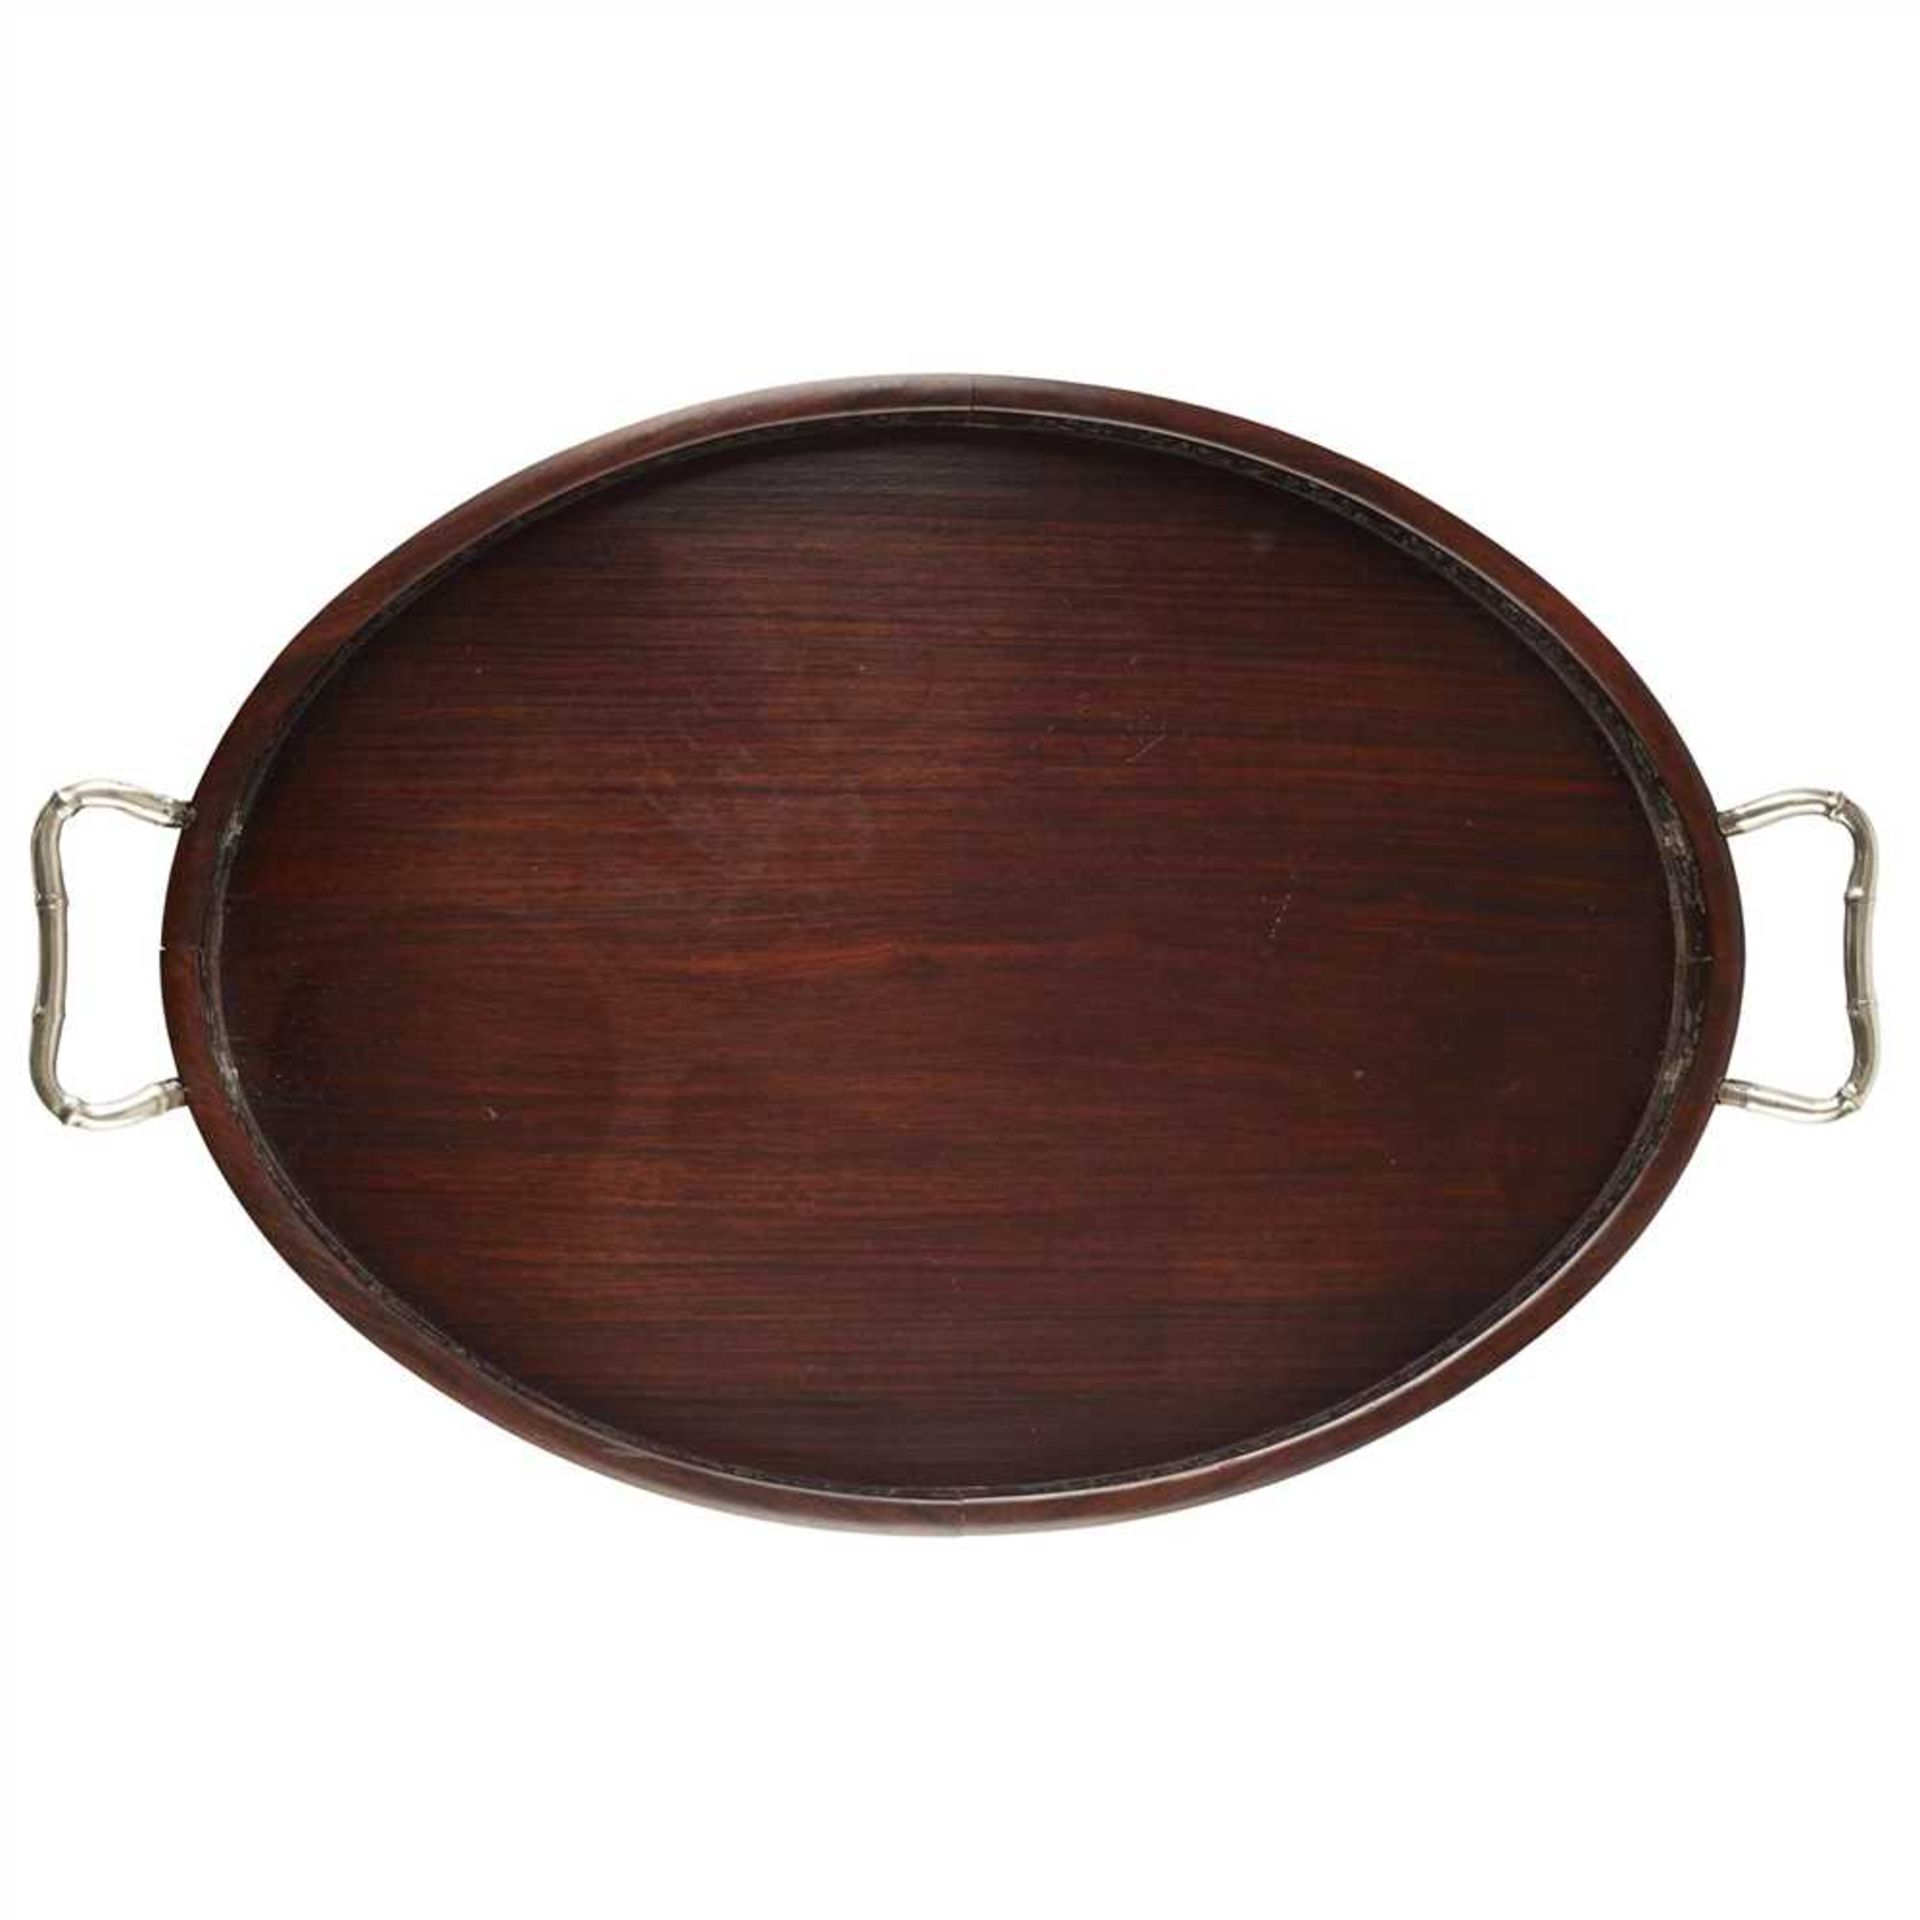 CHINESE EXPORT HARDWOOD SILVER MOUNTED TRAY LATE 19TH/ EARLY 20TH CENTURY - Image 2 of 4